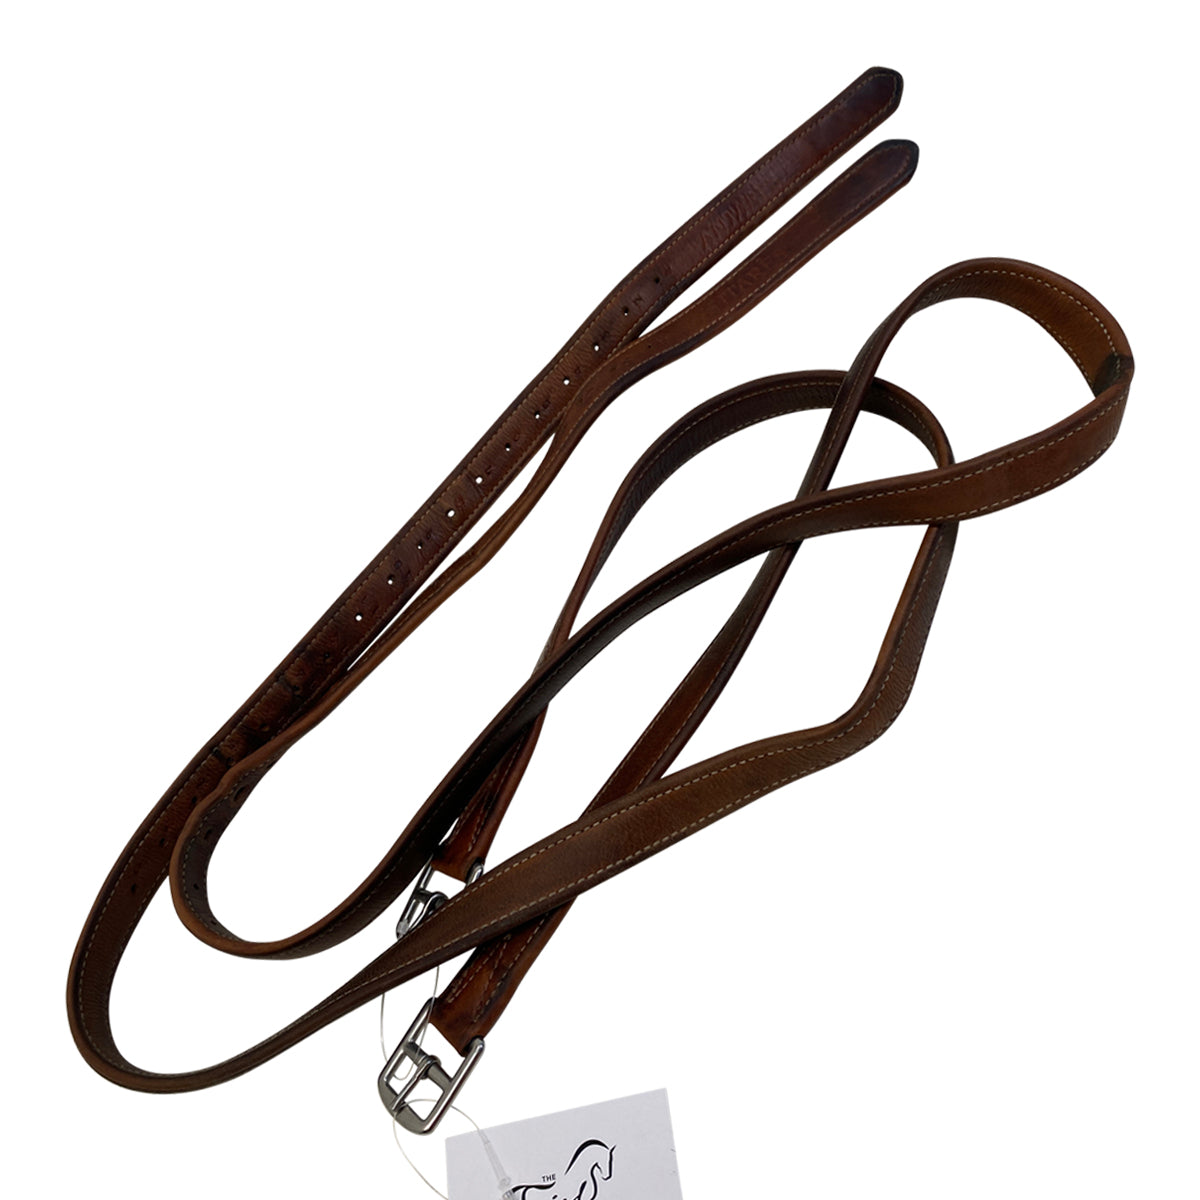 Antares Nylon-Lined Stirrup Leathers in Brown